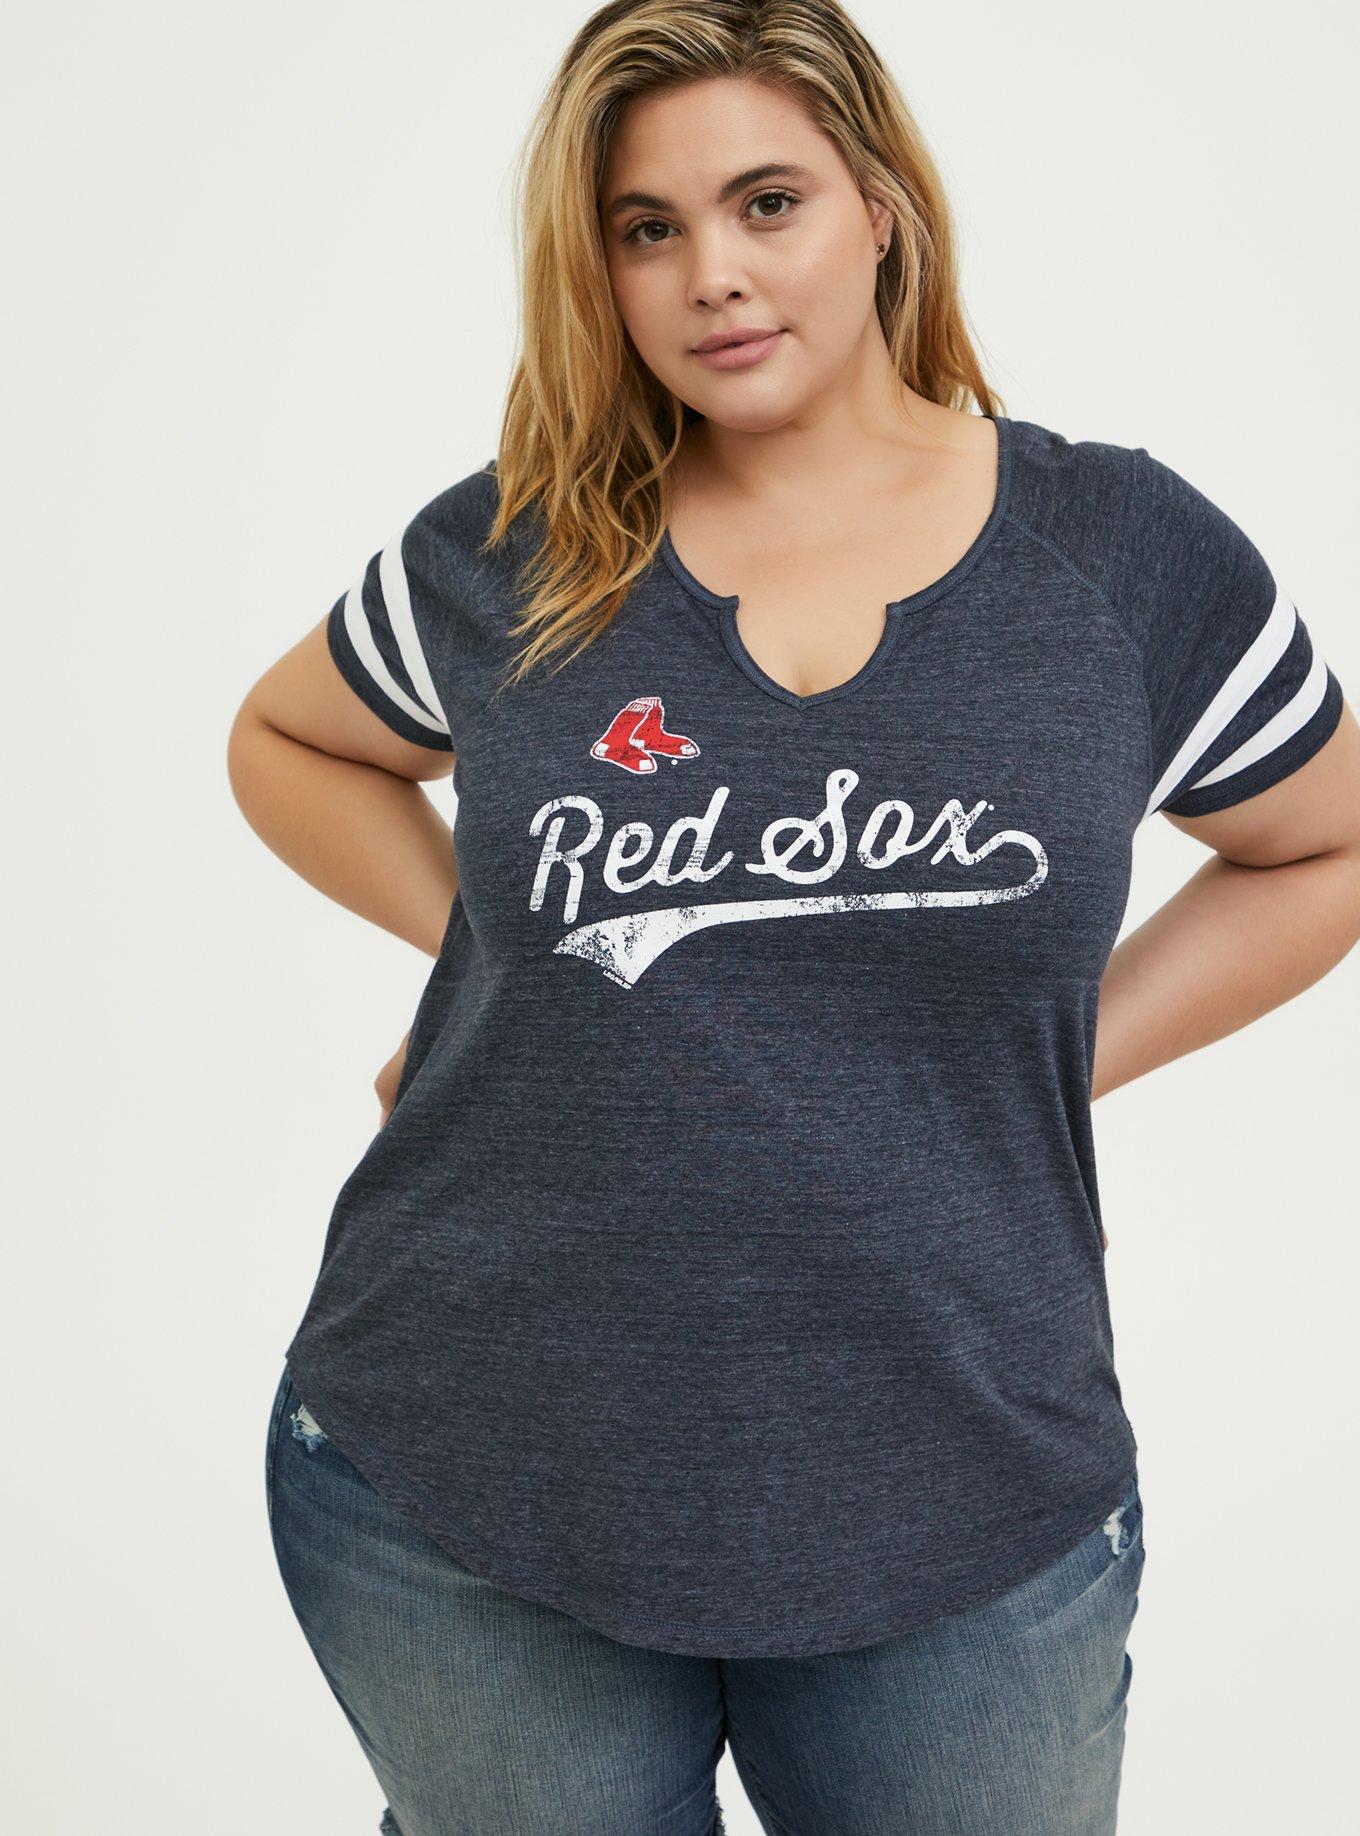 Buy Red Sox Vintage Shirt Online In India -  India